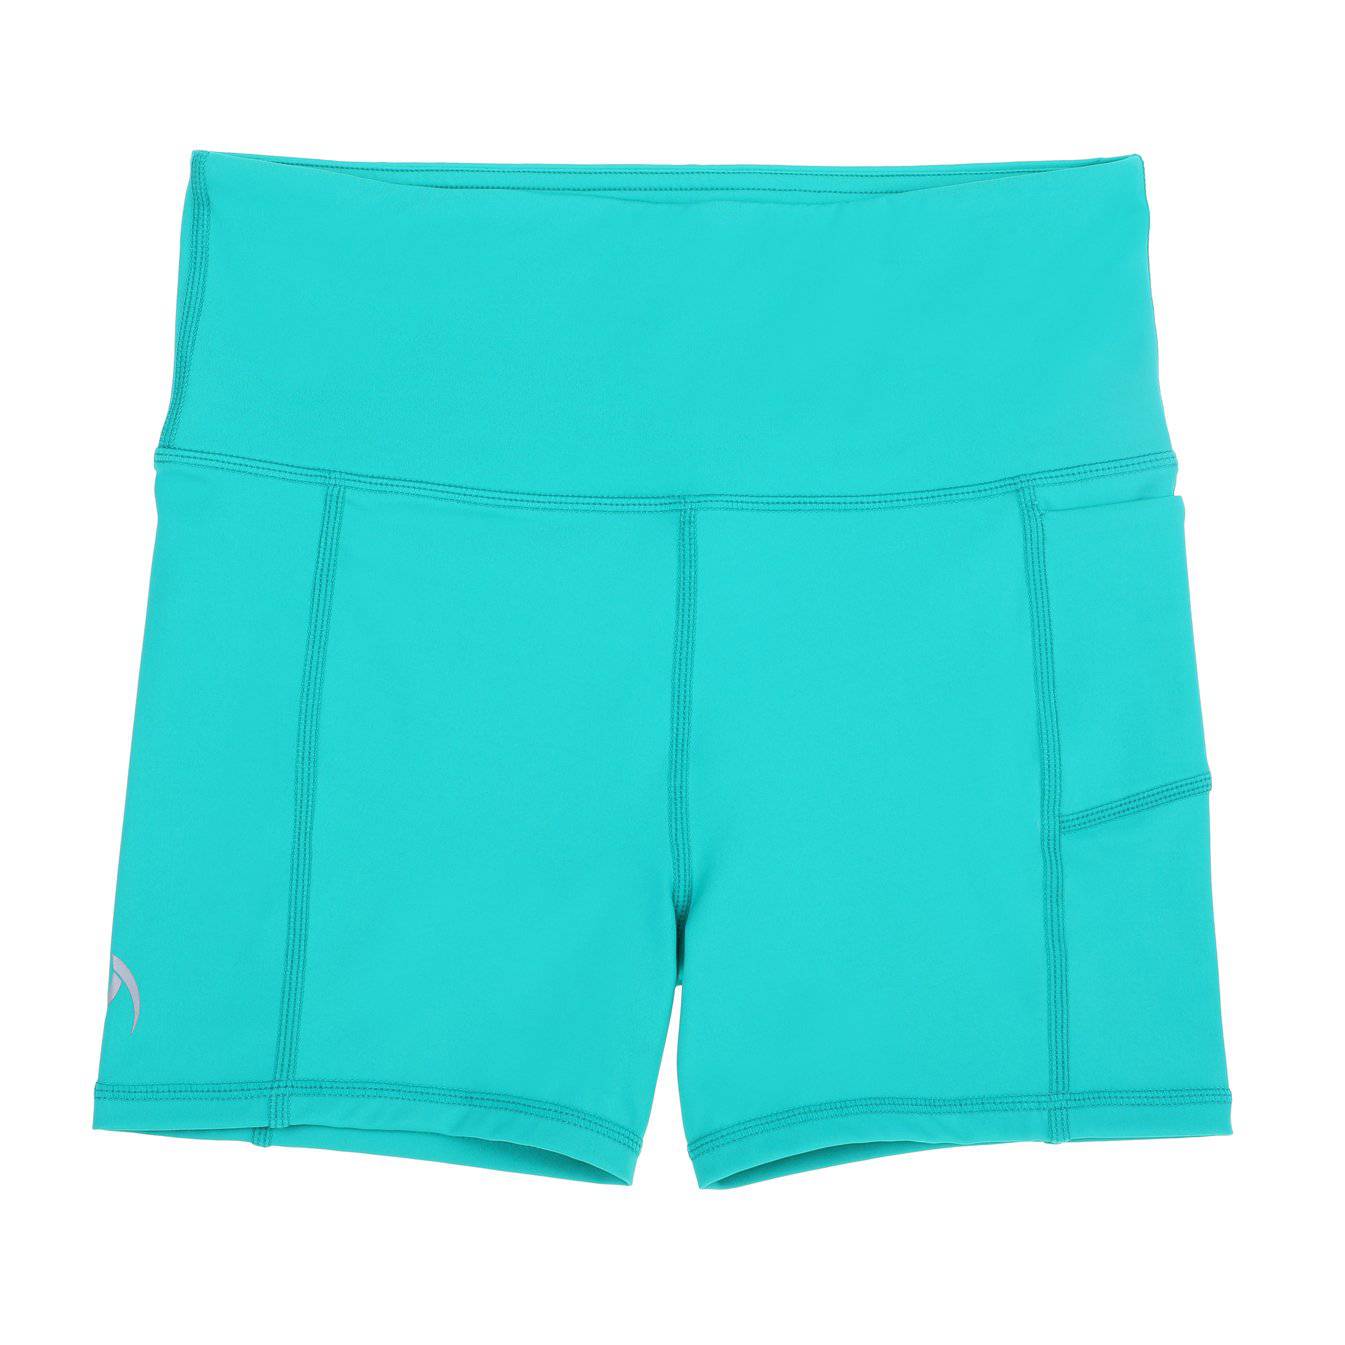 The Perfect Sport Athletic Shorts